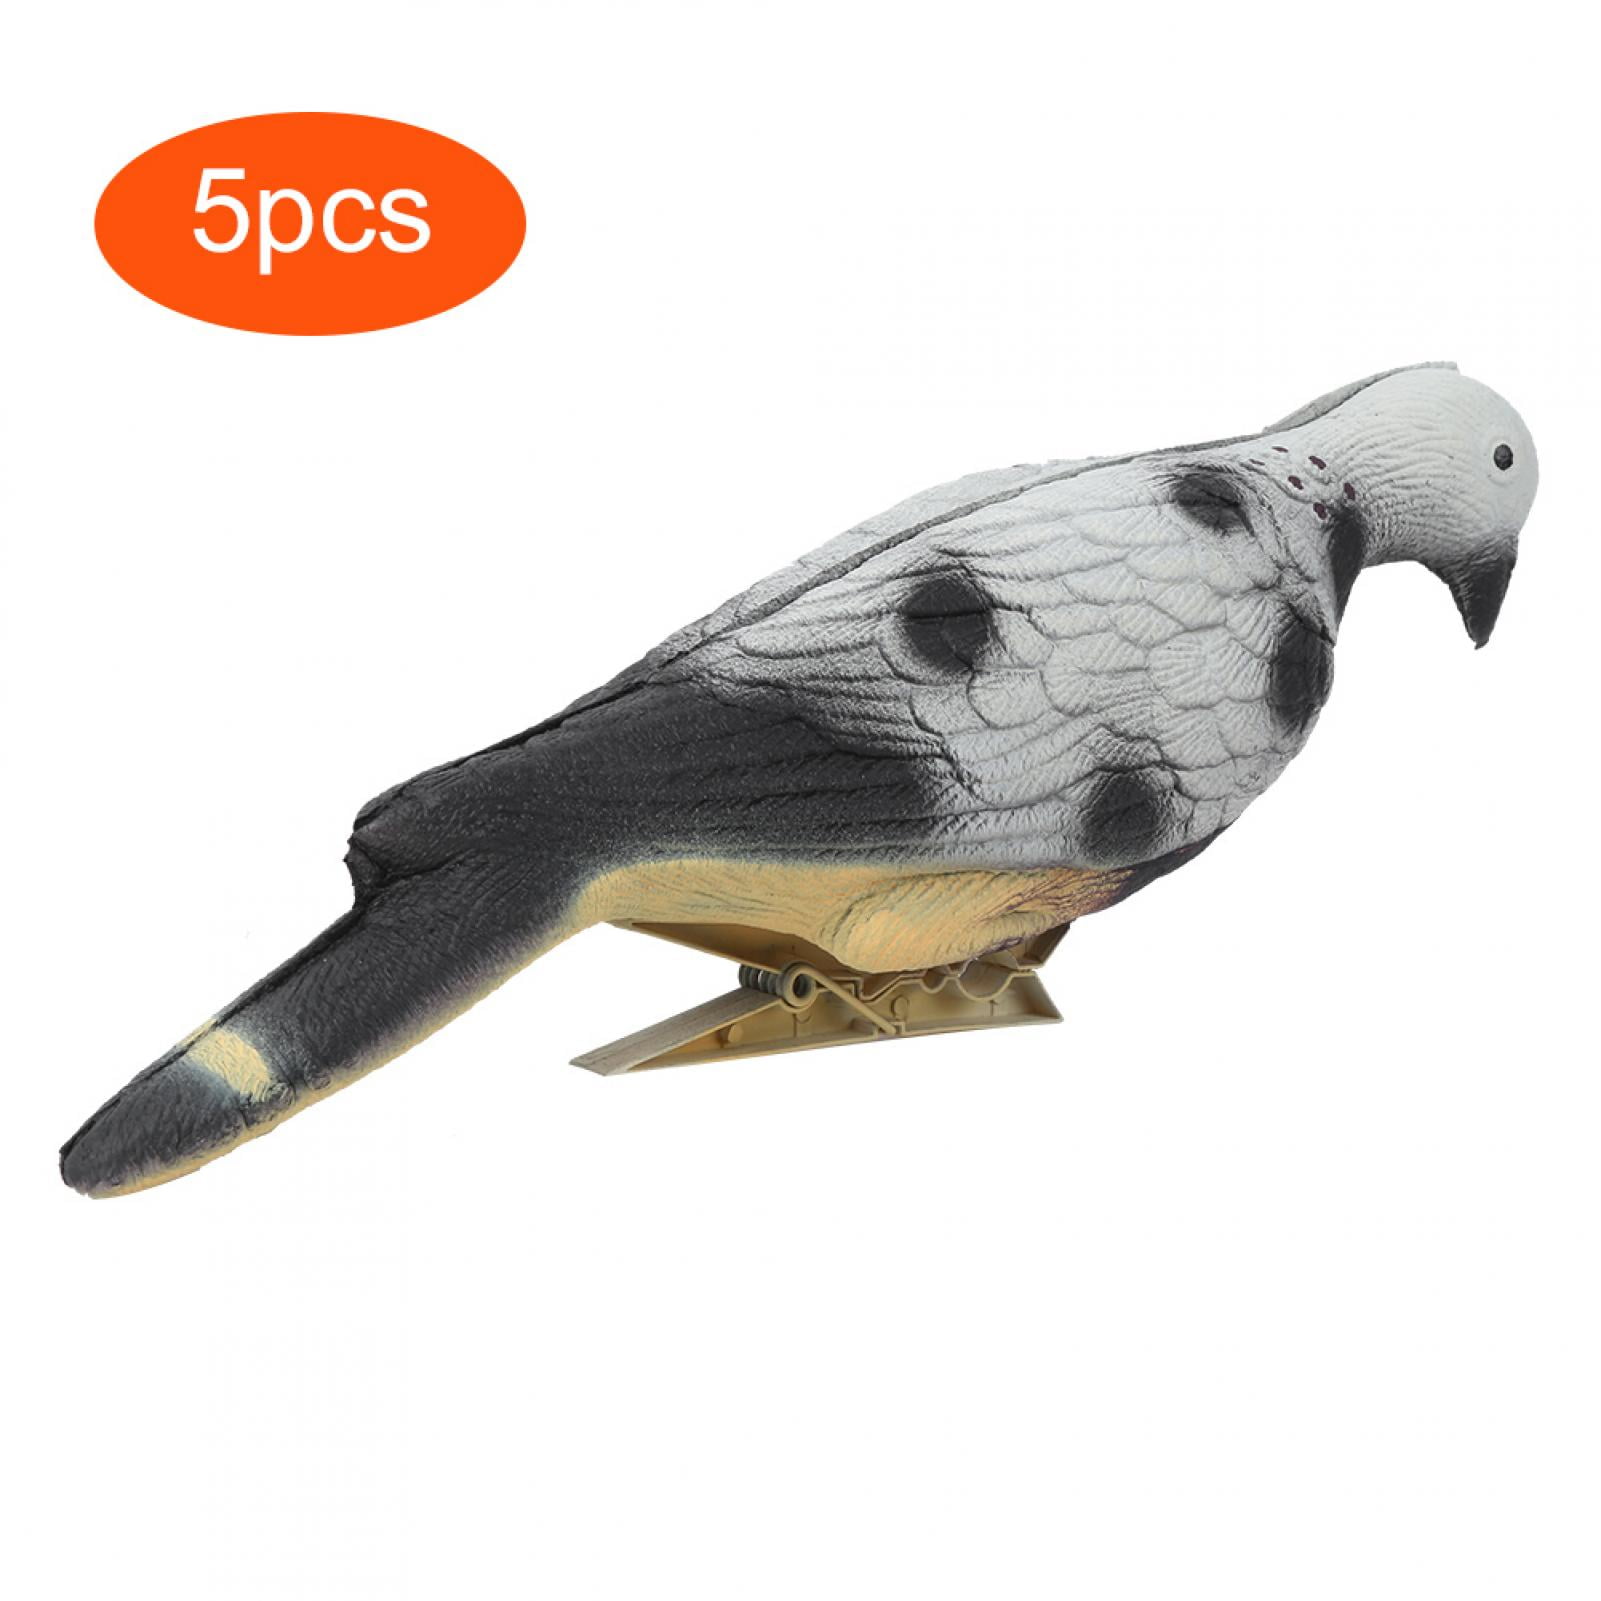 Indoor Courtyard Decoration 6pcs Archery Target 3D Animal Pigeon Decoy Archery Animal Target for Outdoor Shooting Hunting 